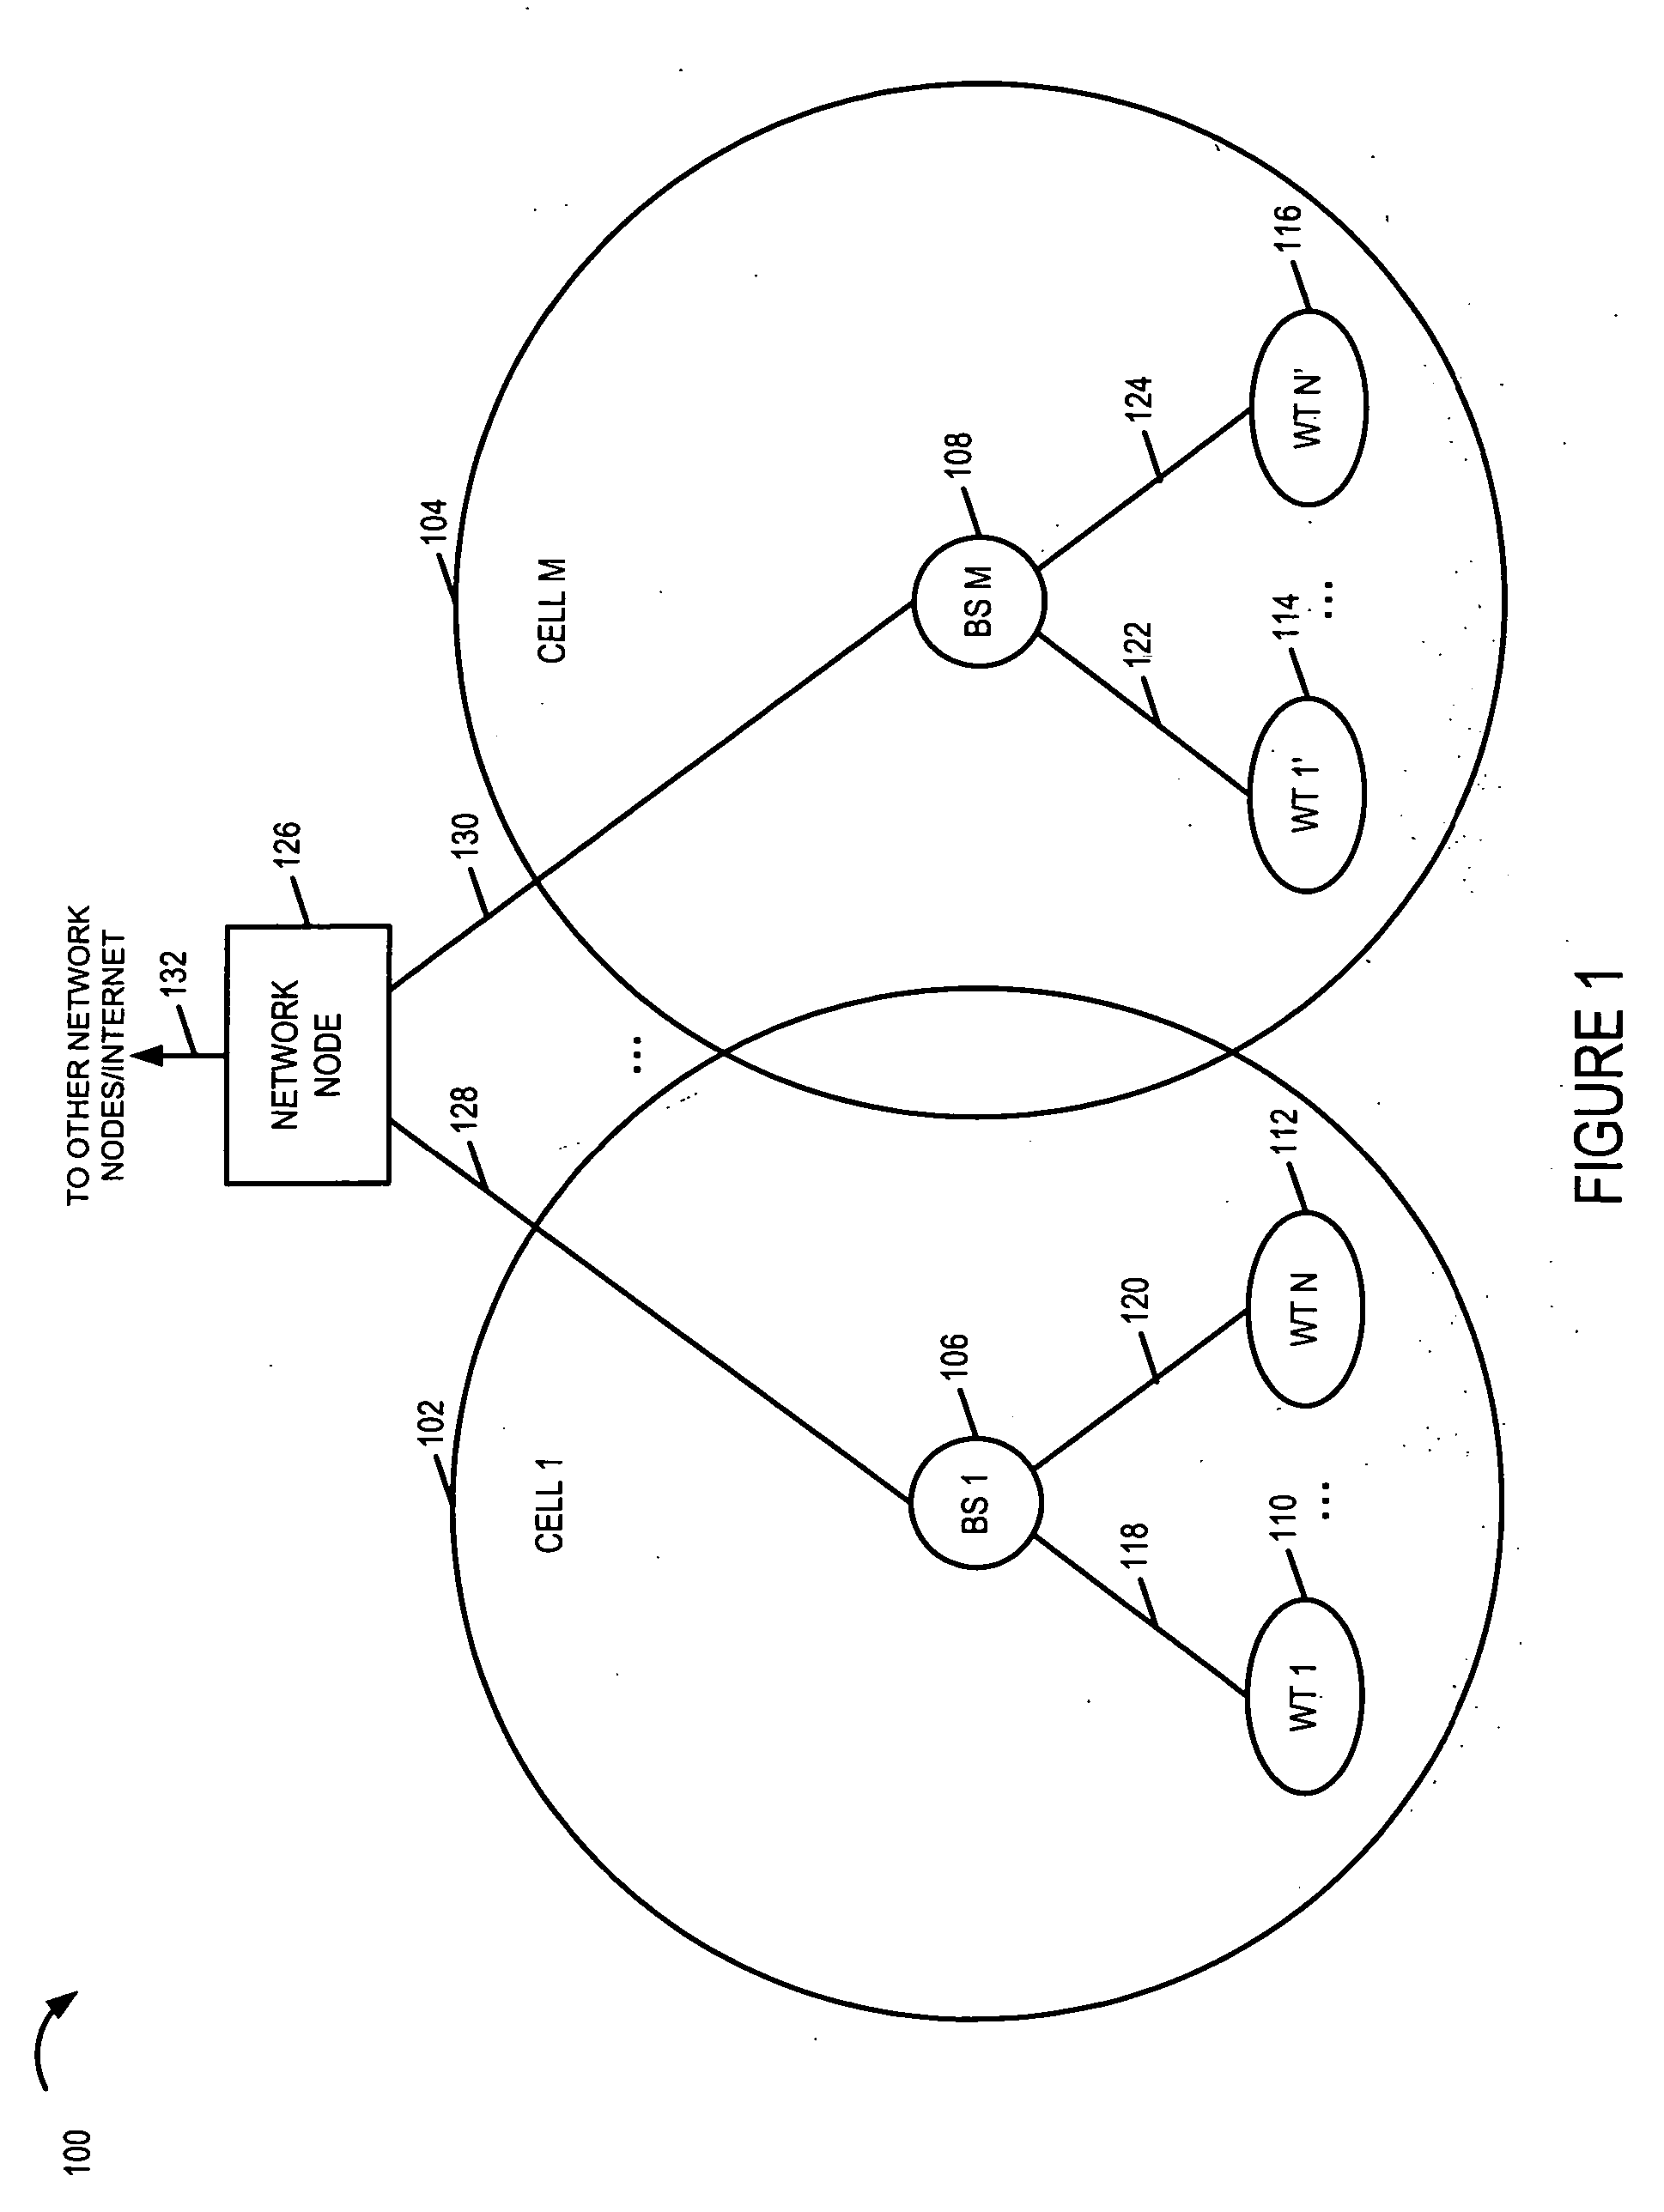 Data rate methods and apparatus